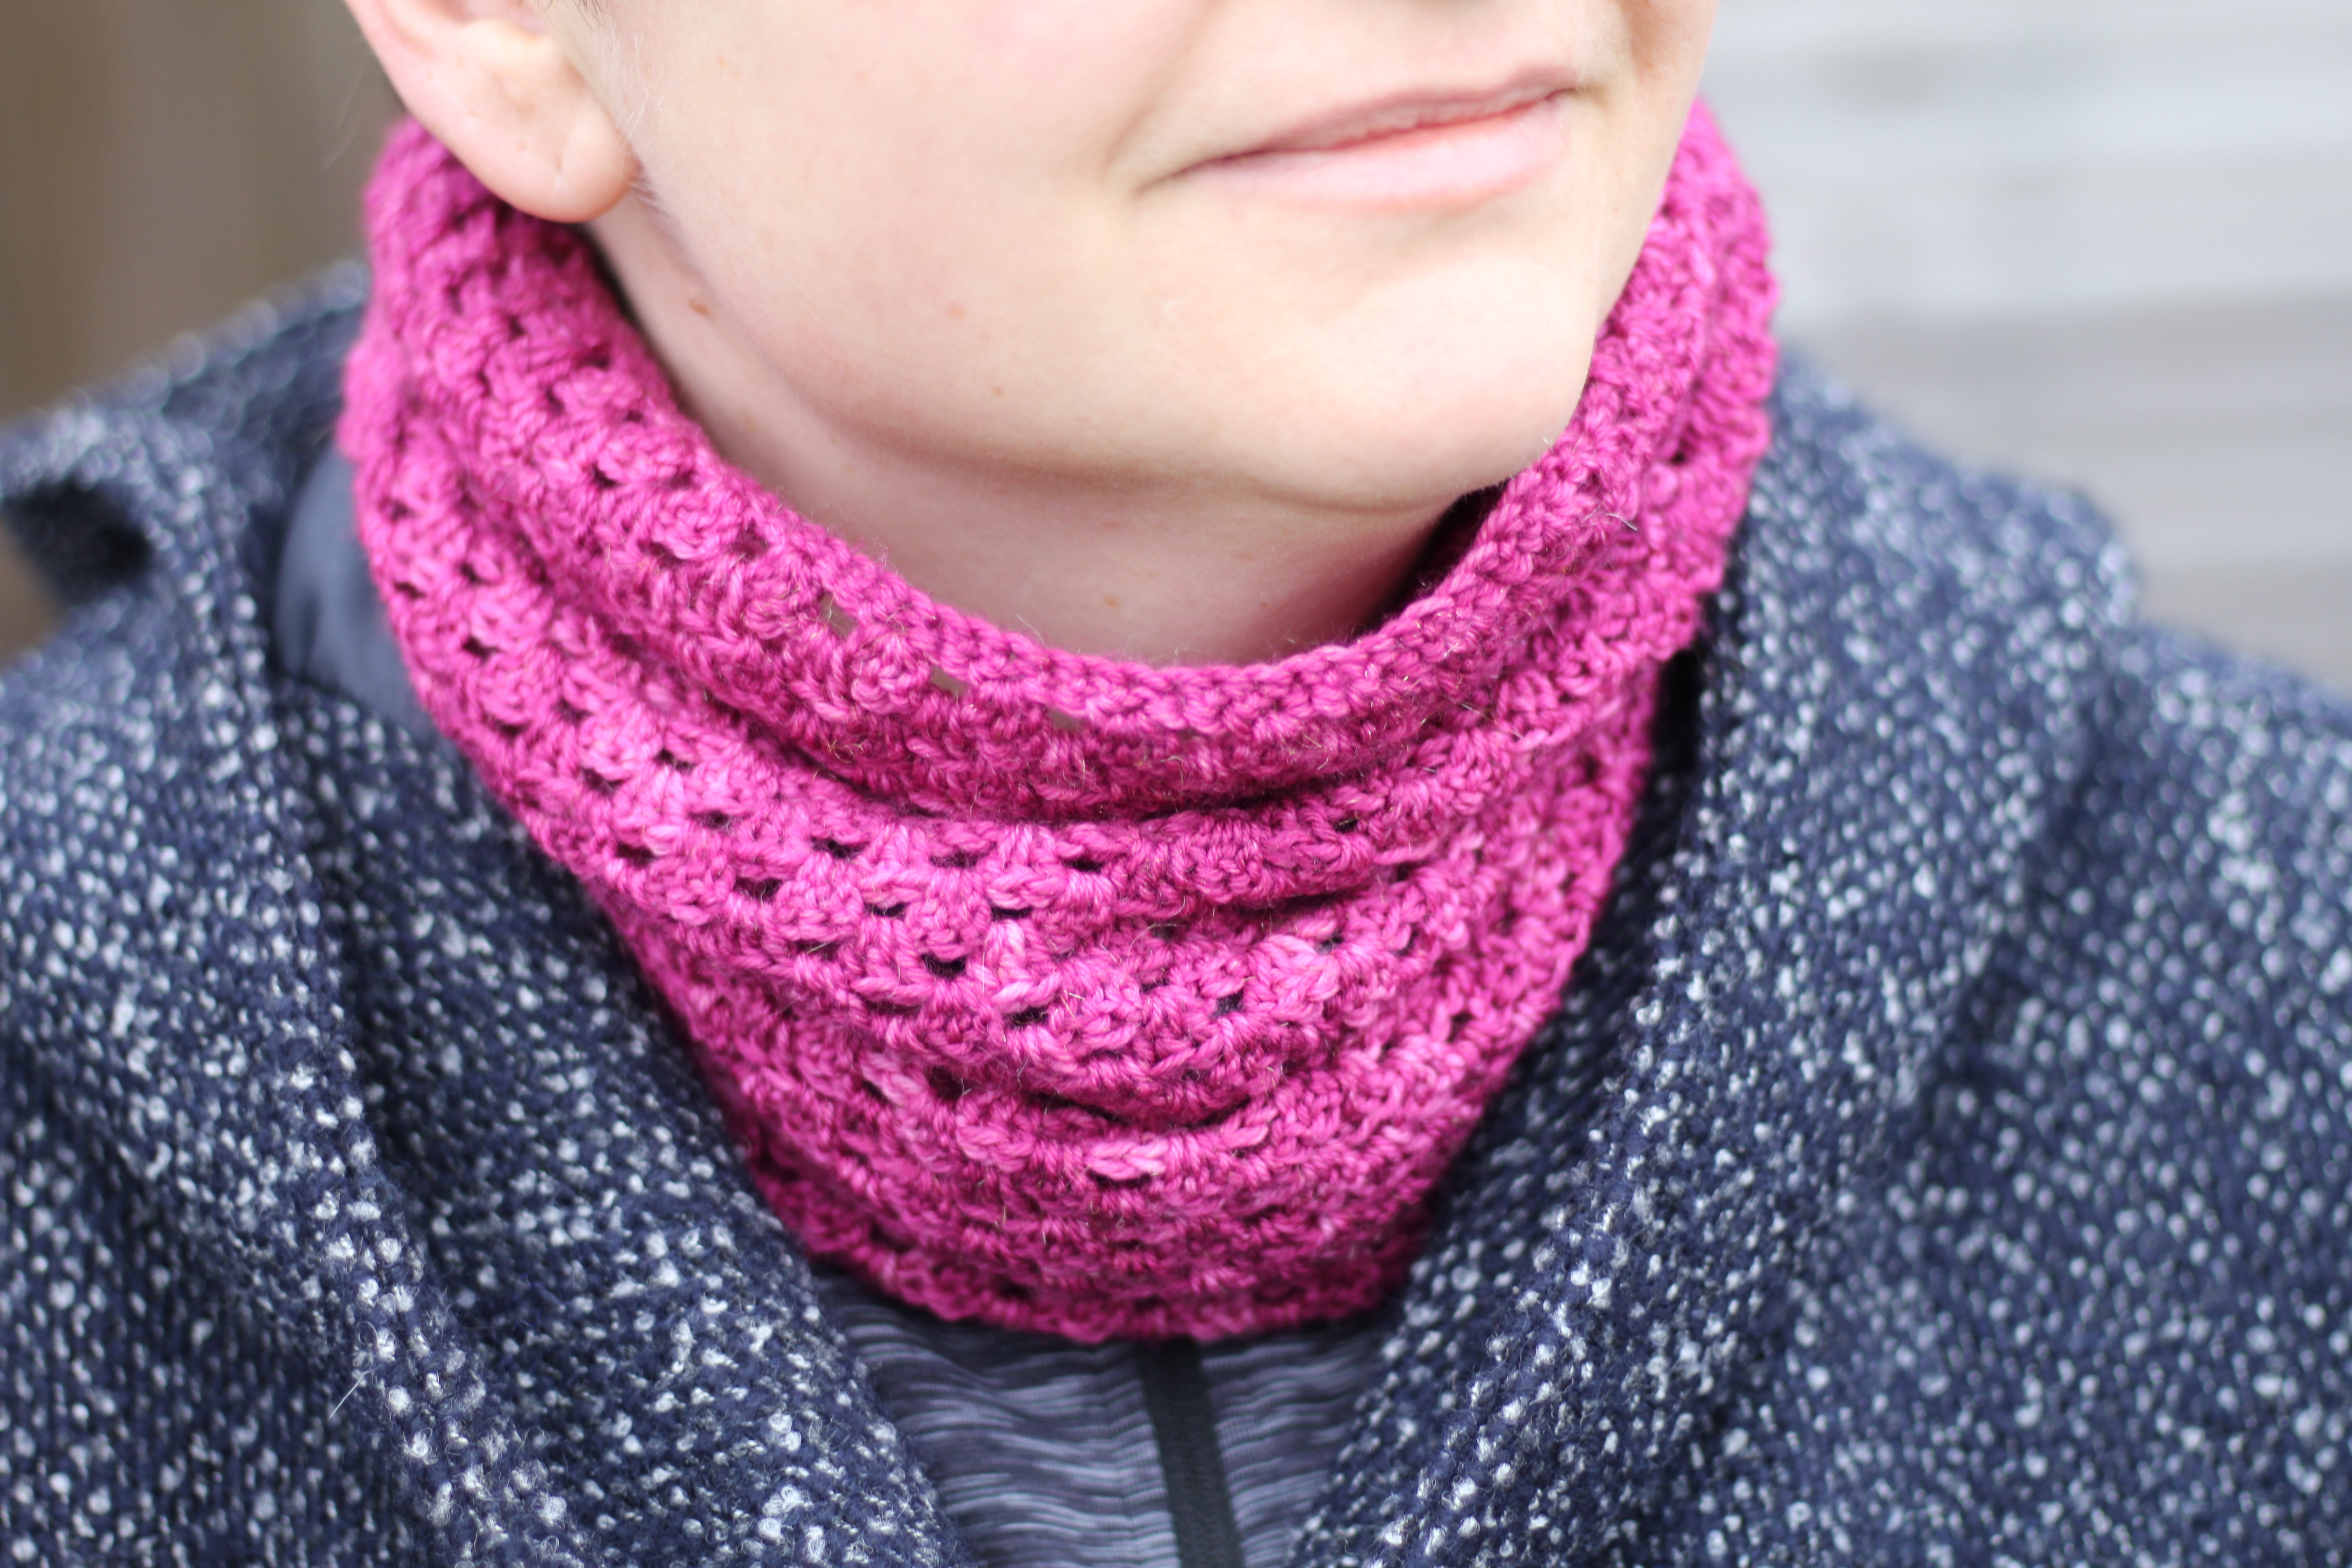 Victoria wearing a rich pink crochet cowl with a black and white coat